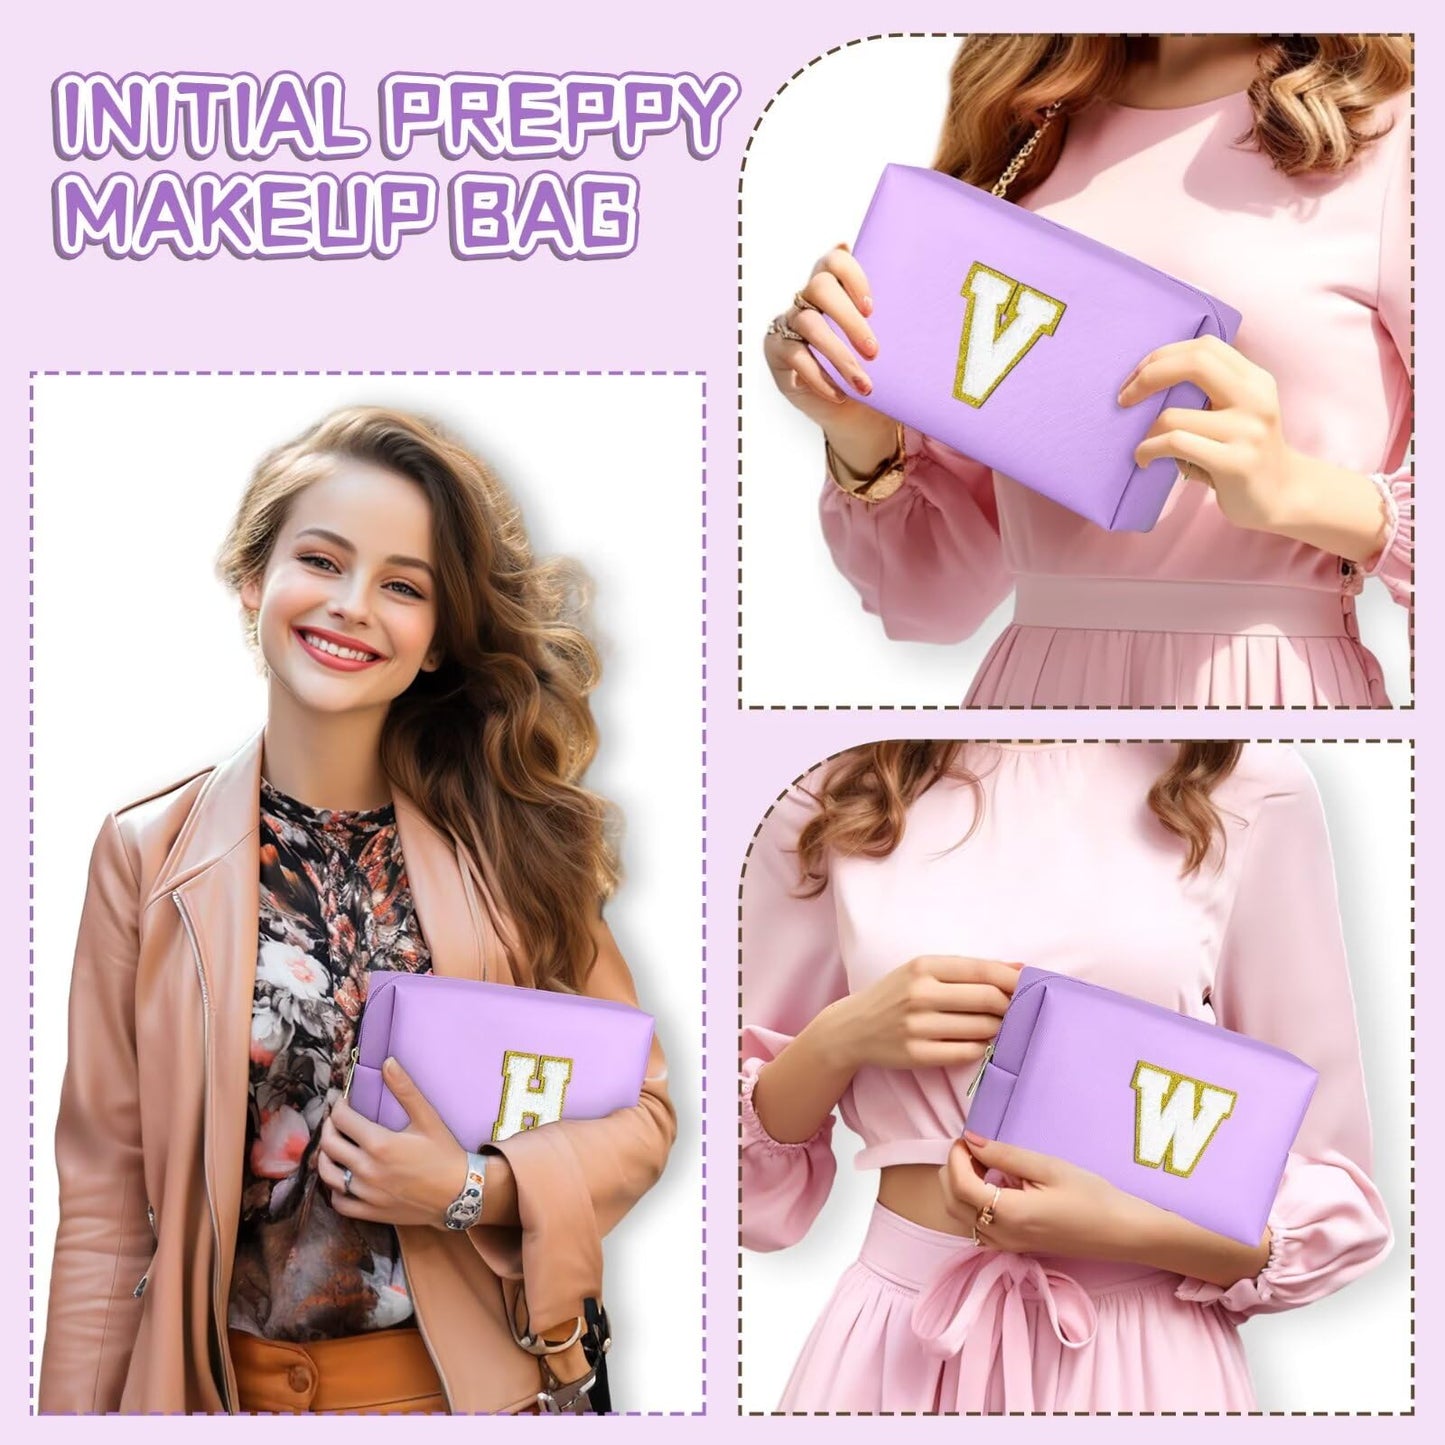 TOPEAST Preppy Makeup Bag, Personalized Initial Bags with Zipper, Cute Makeup Pouch, PU Leather Waterproof Cosmetic Bag, Birthday Gift For Daughter, Preppy Things For Teen Girls (Purple A)